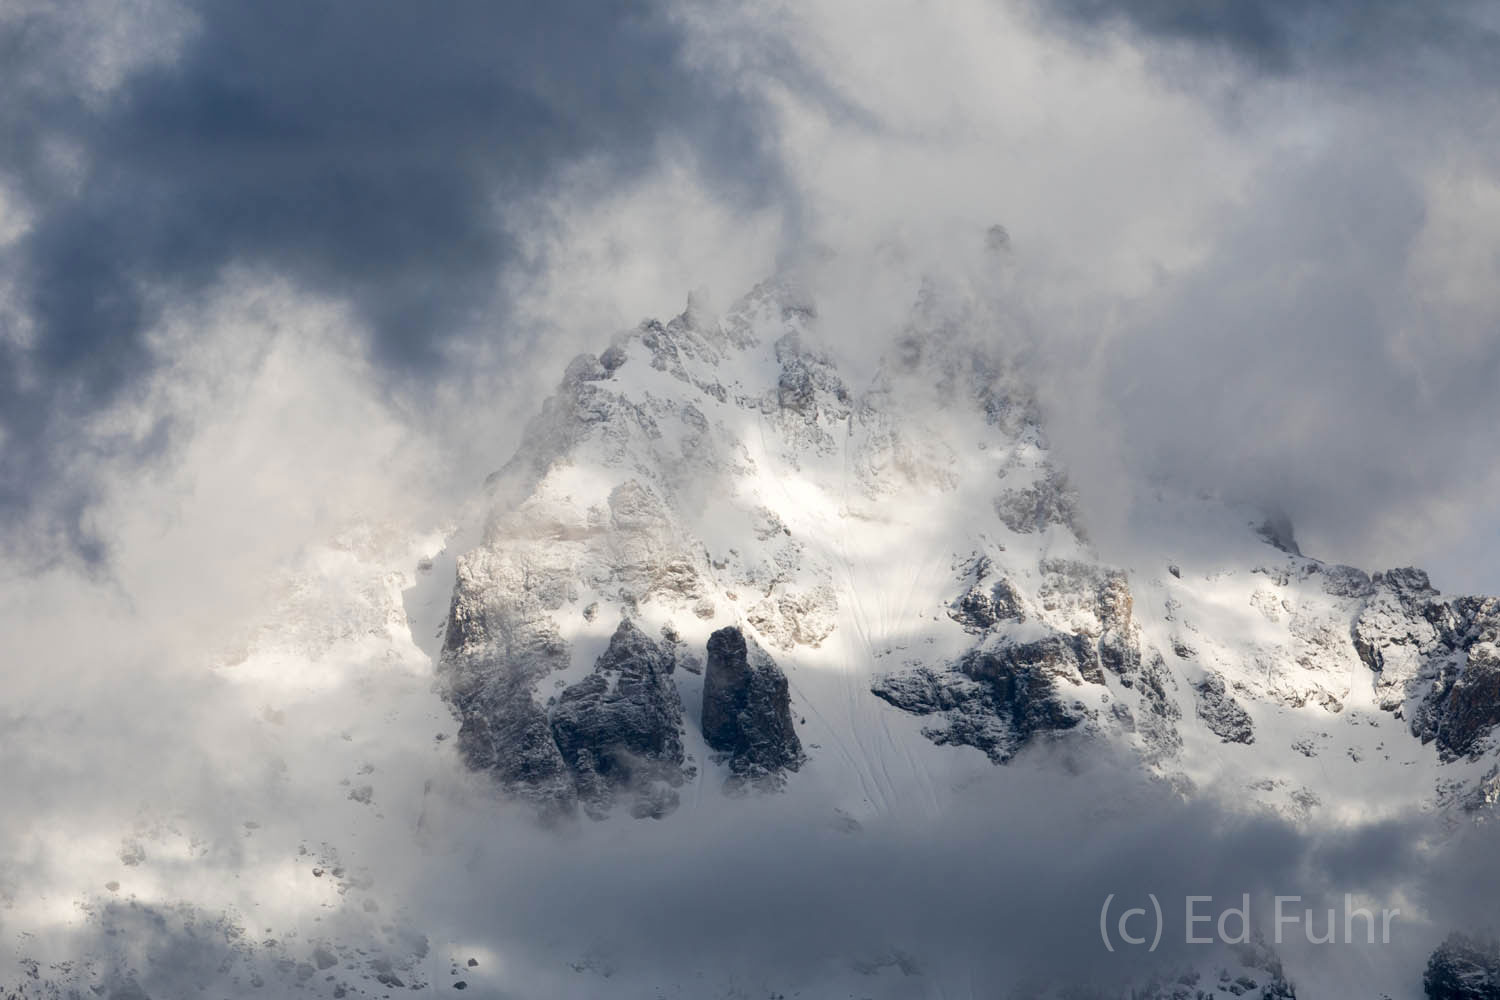 A window opens in the storm clouds allowing a peak at the Grand Teton, revealing that these clouds have delivered a June snow...